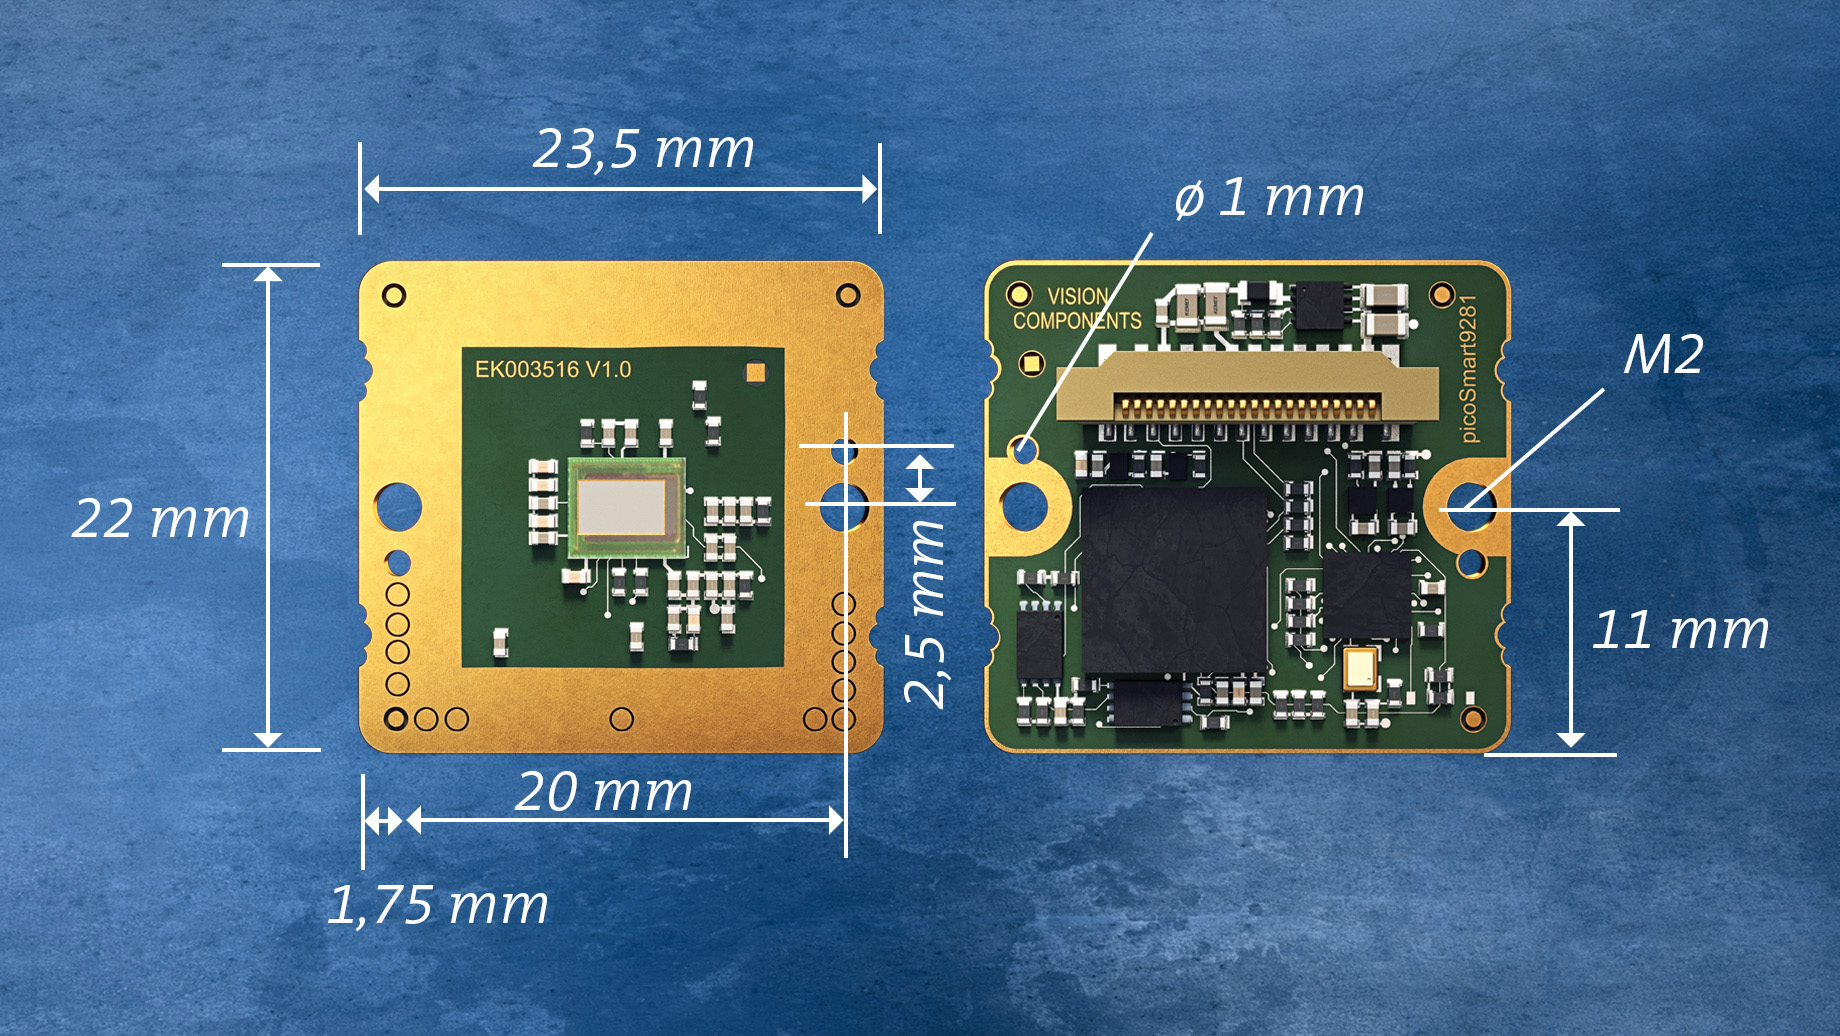 The image capture and processing components are perfectly attuned for excellent results and all integrated on one ultracompact board – OEMs can thereby save costs and time on vision sensor development